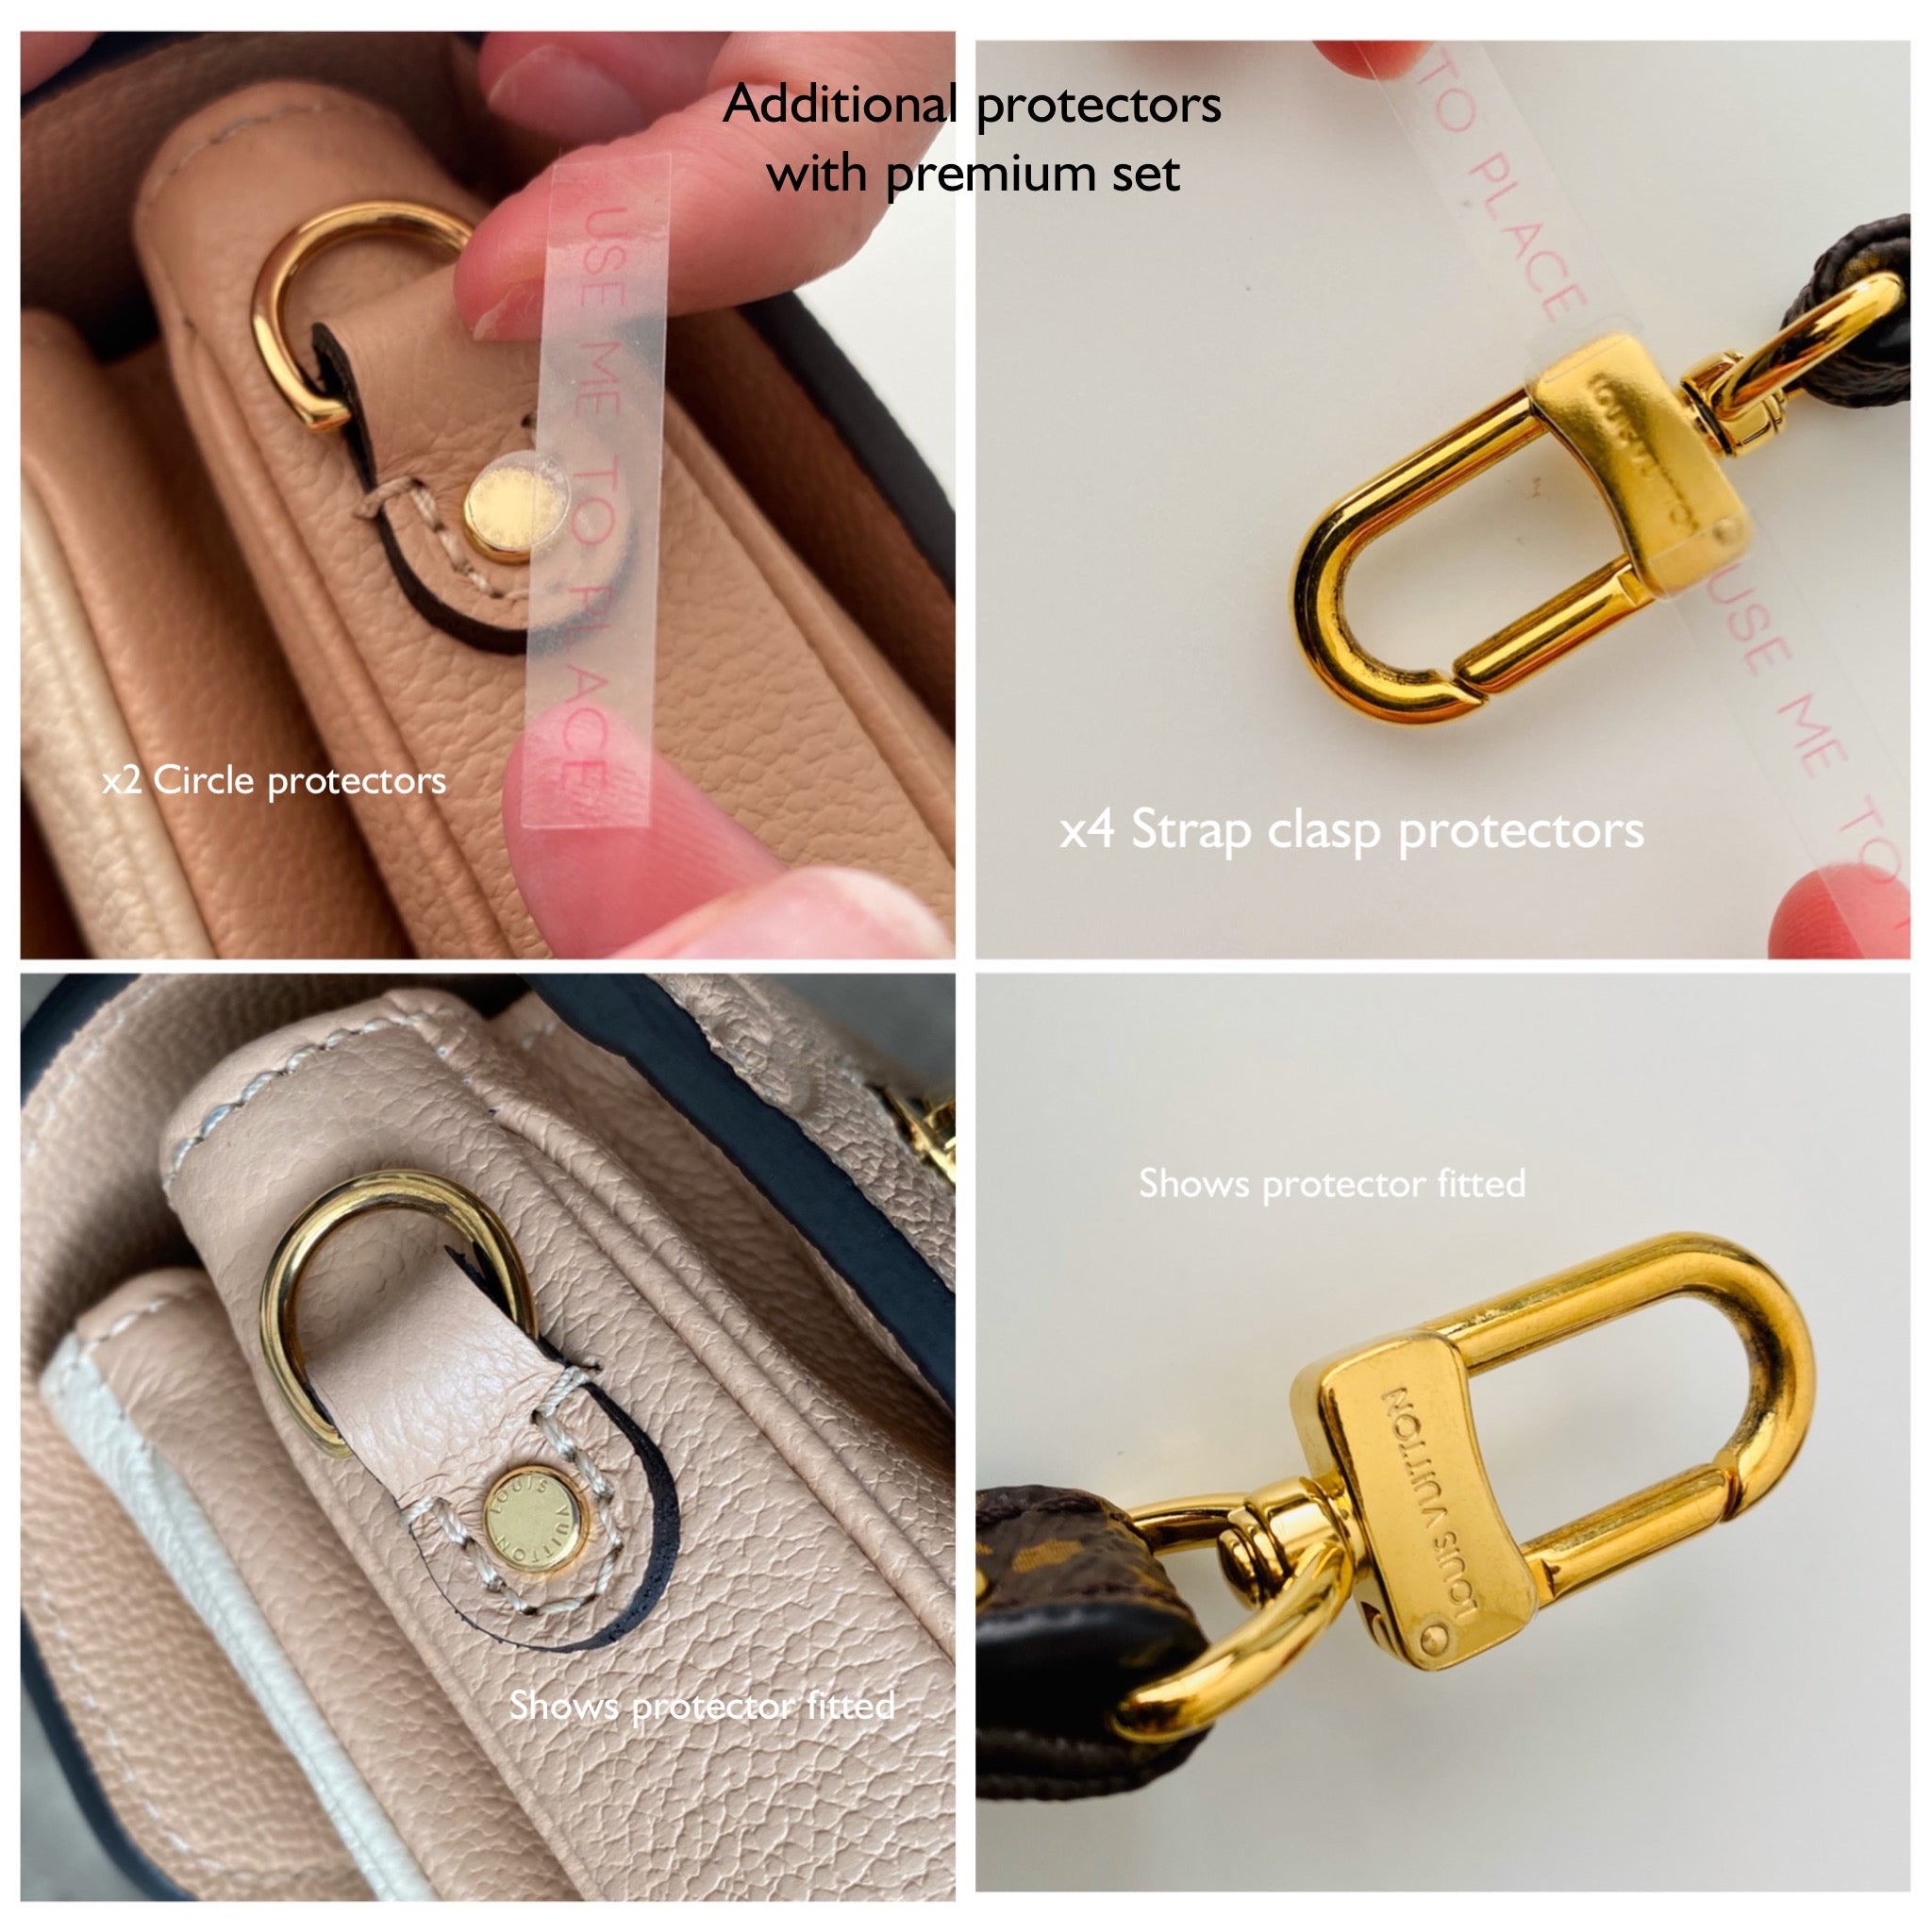 LOUIS VUITTON NEVERFULL HOW TO SPOT A FAKE? - Shiny Syl blog